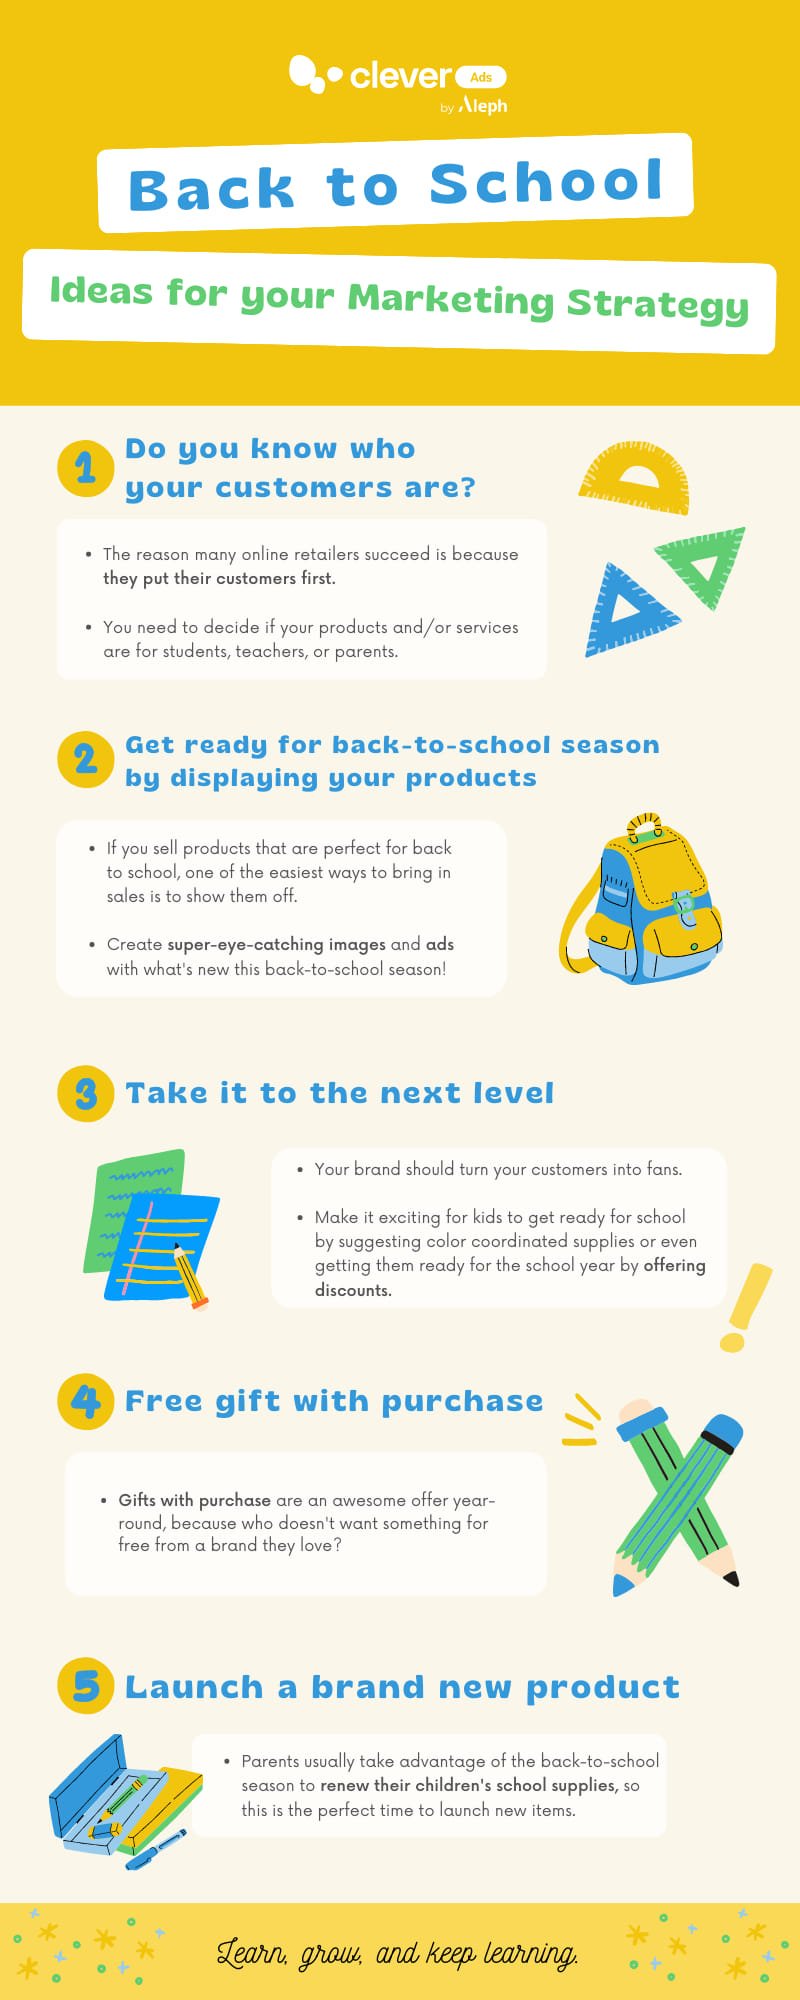 Back to School - Ideas for your Marketing Strategy - Infographic